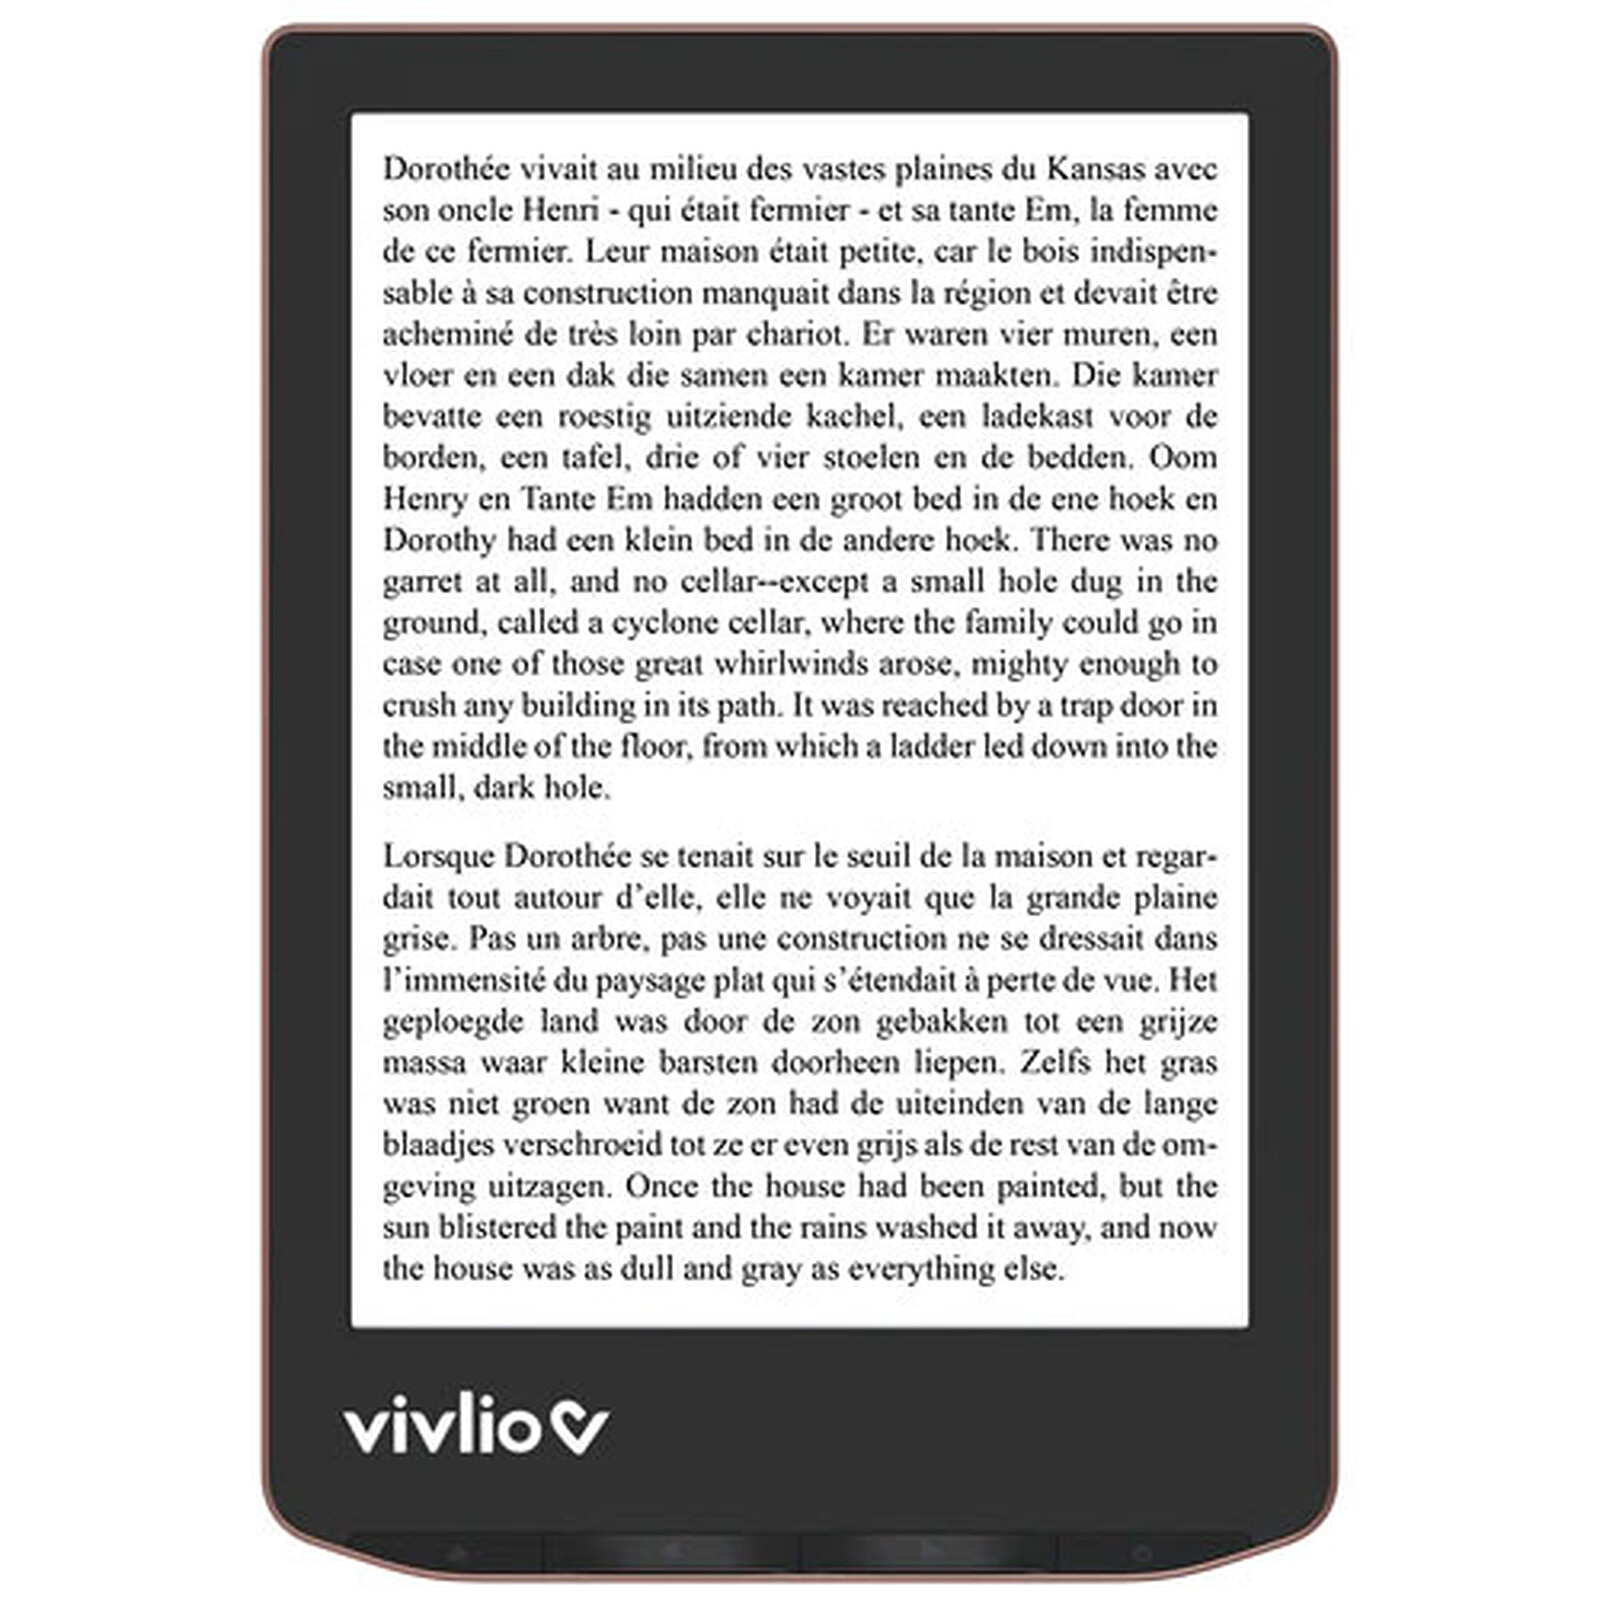 Vivlio Touch HD Plus Limited Edition - E-reader - LDLC 3-year